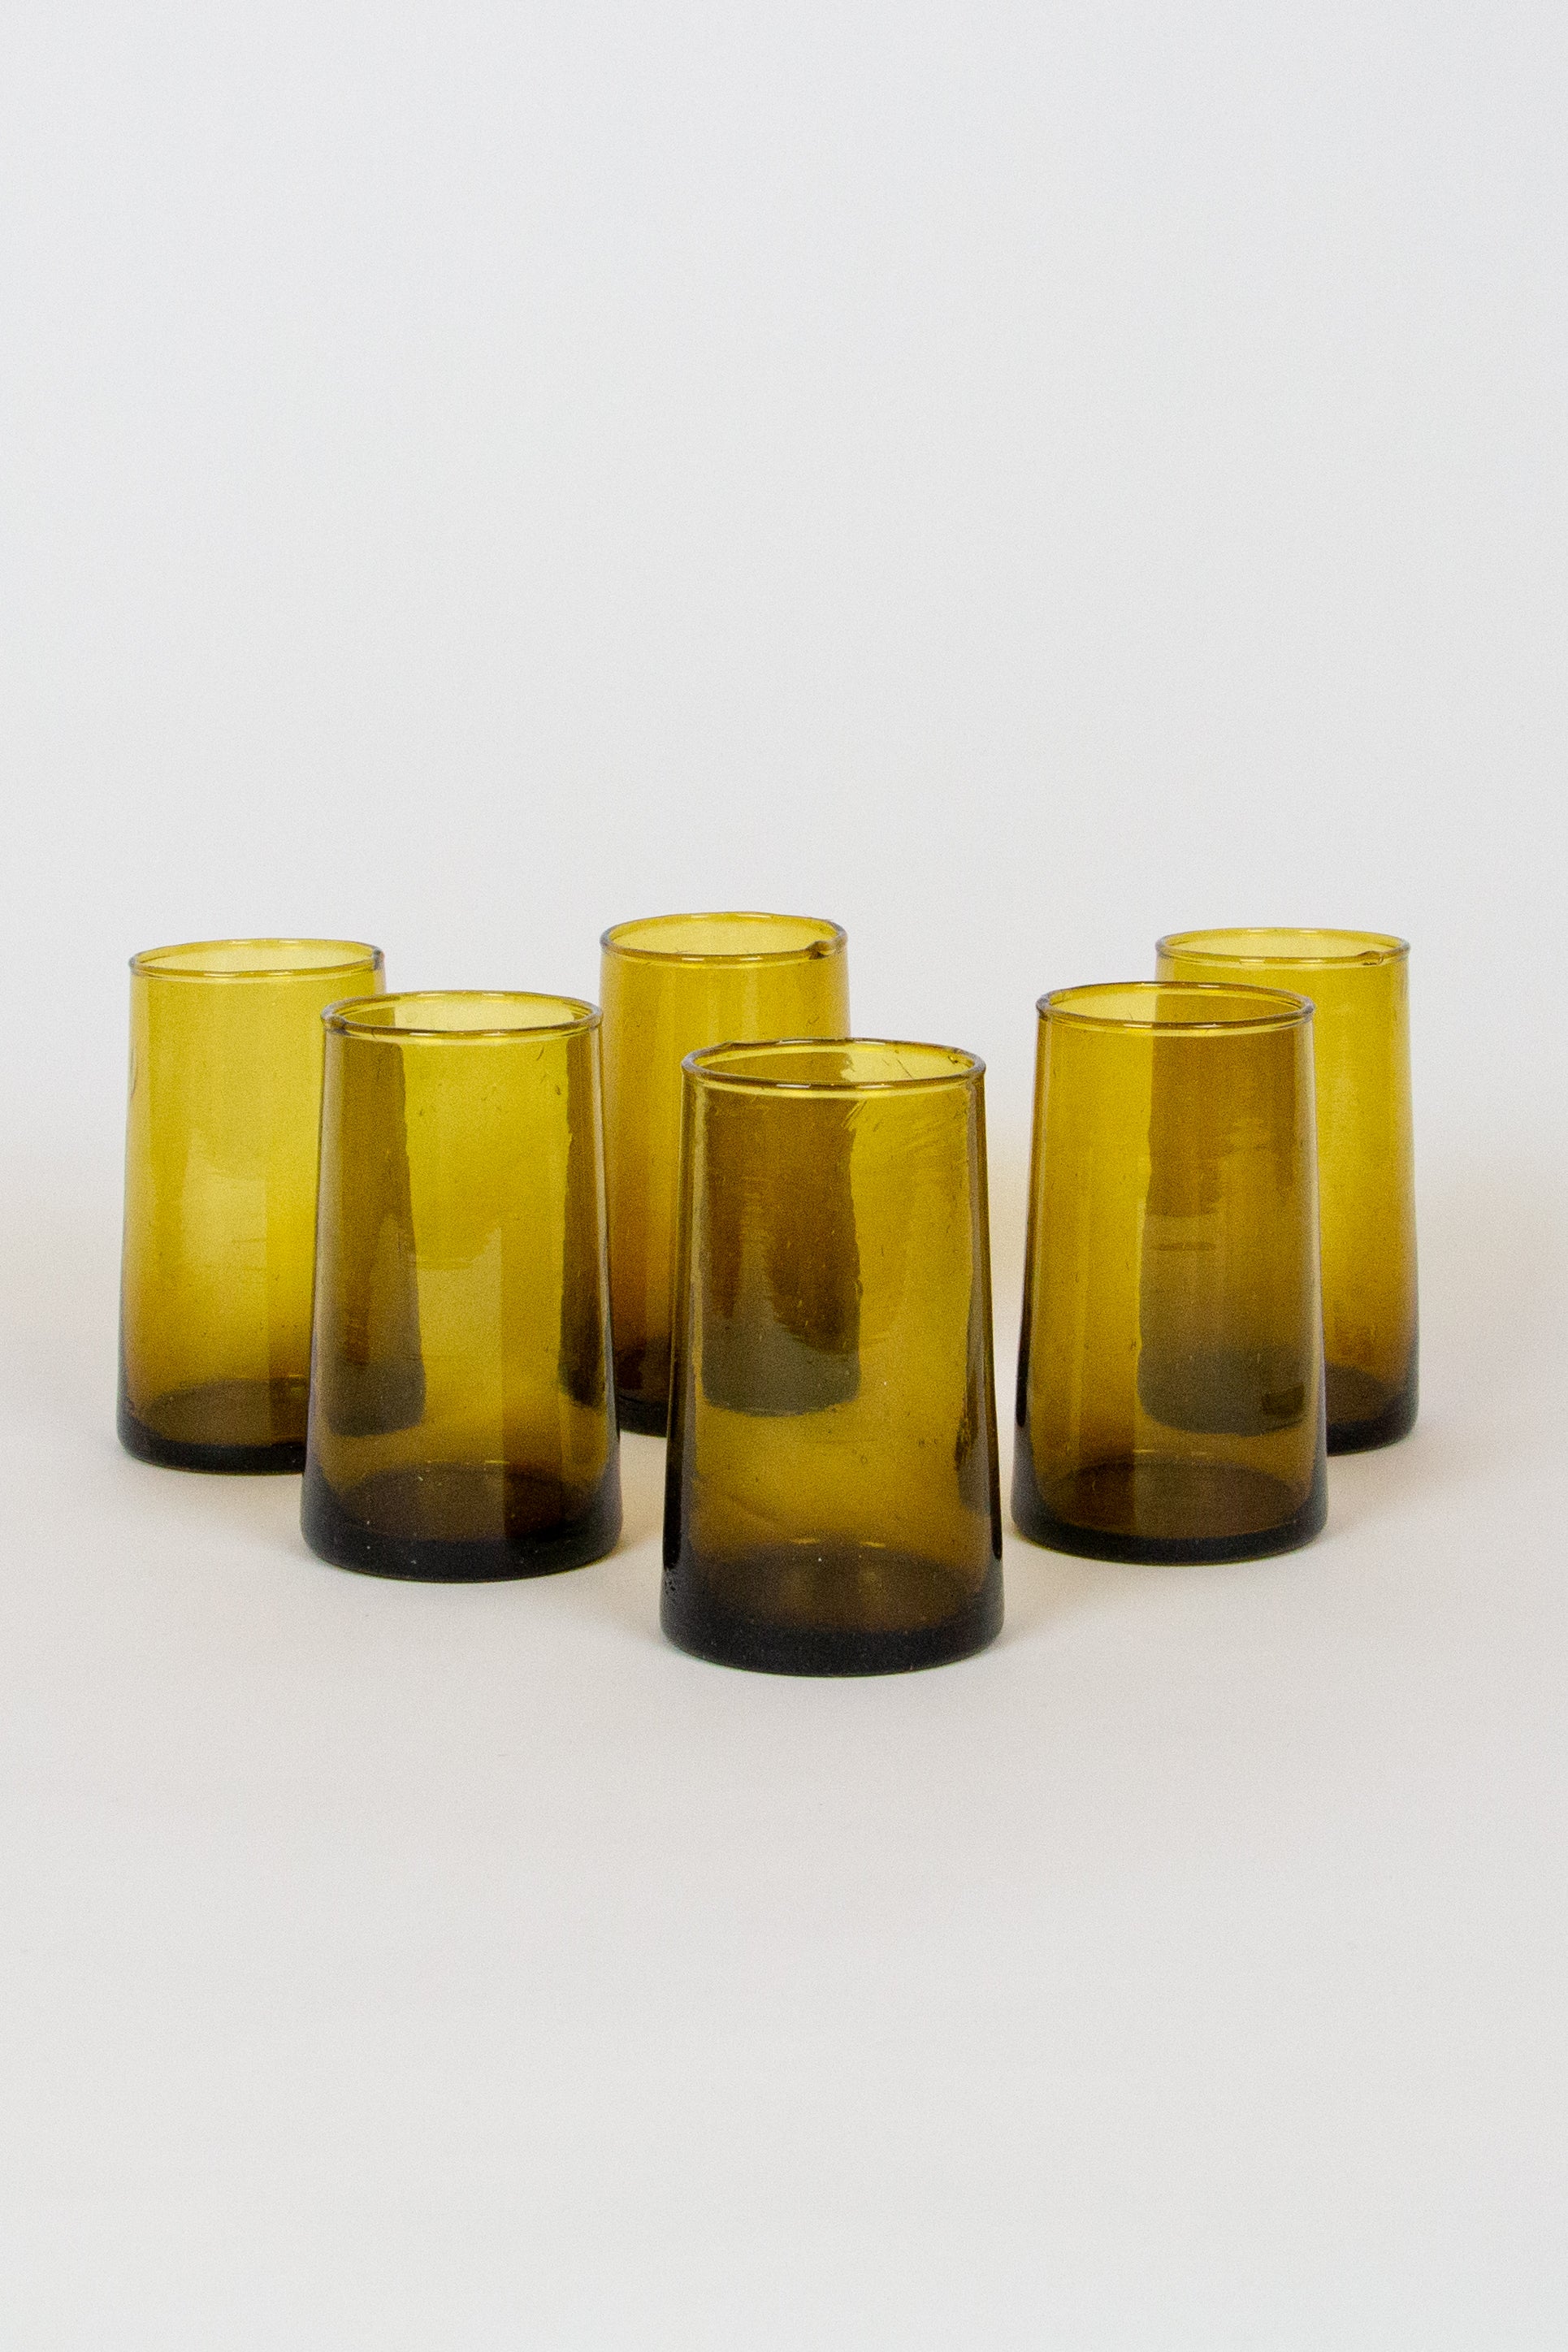 Tall Cone Moroccan Drinking Glasses in Amber, SET OF 6